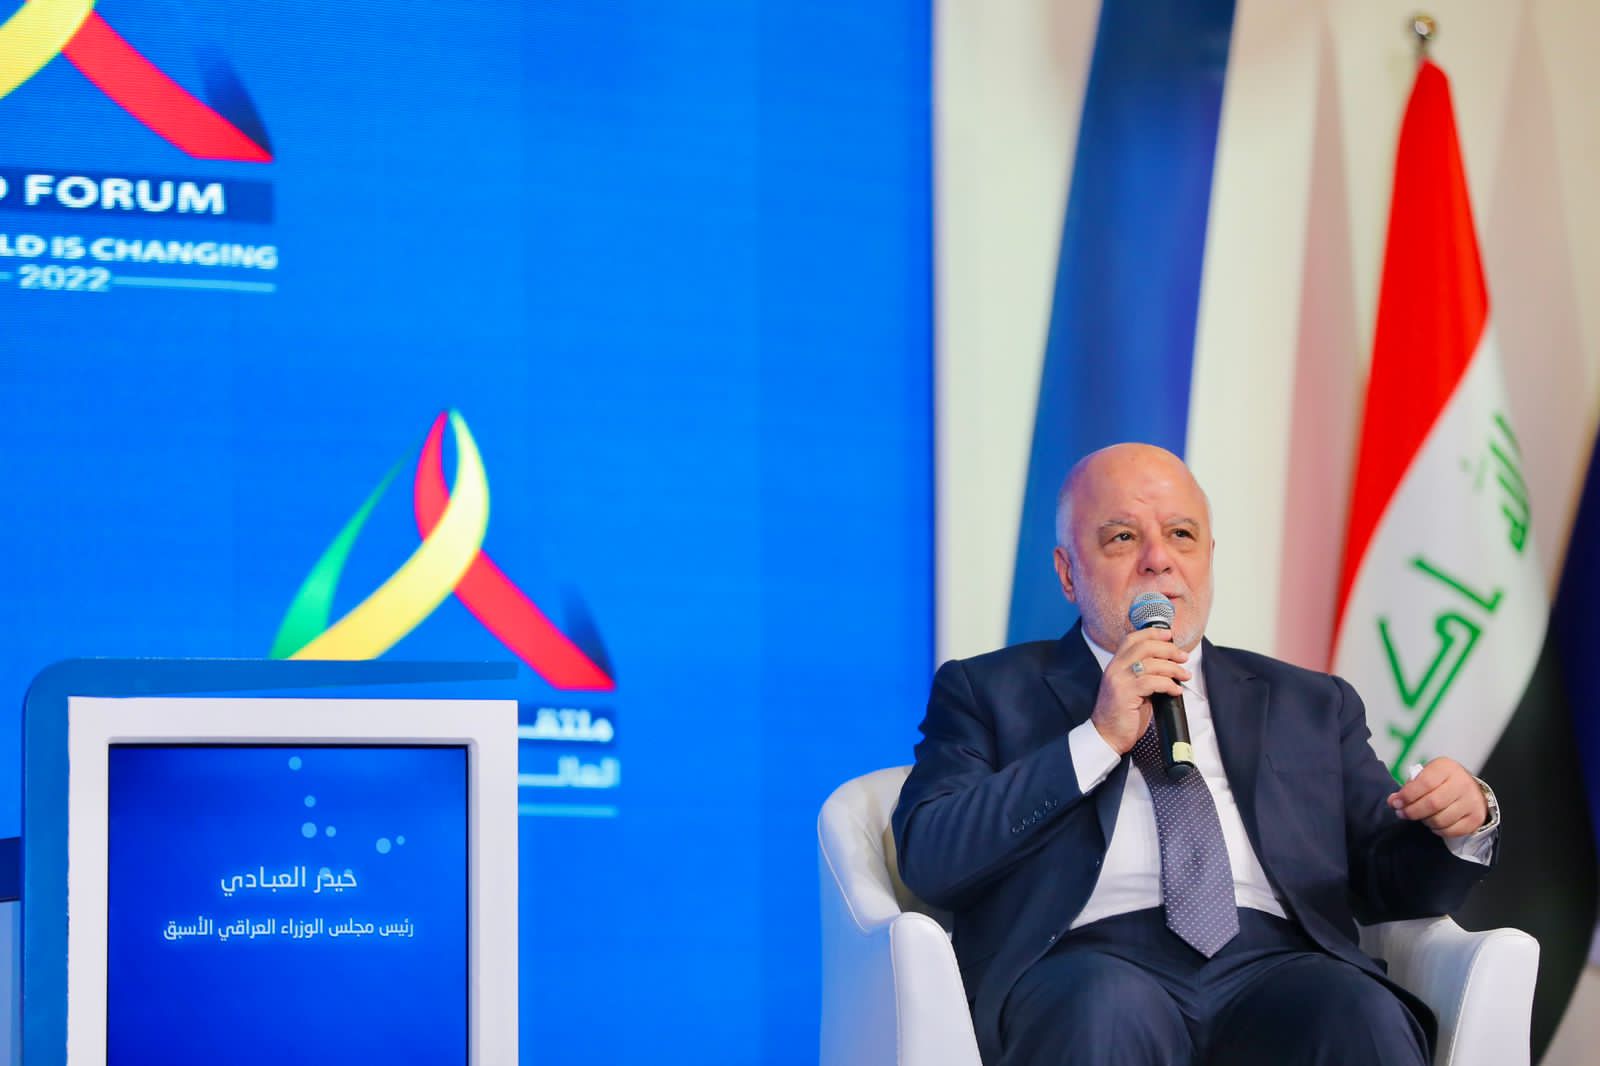 Al-Abadi - There is consensus between the camp of Iran and the camp of the West and America on the stability of Iraq